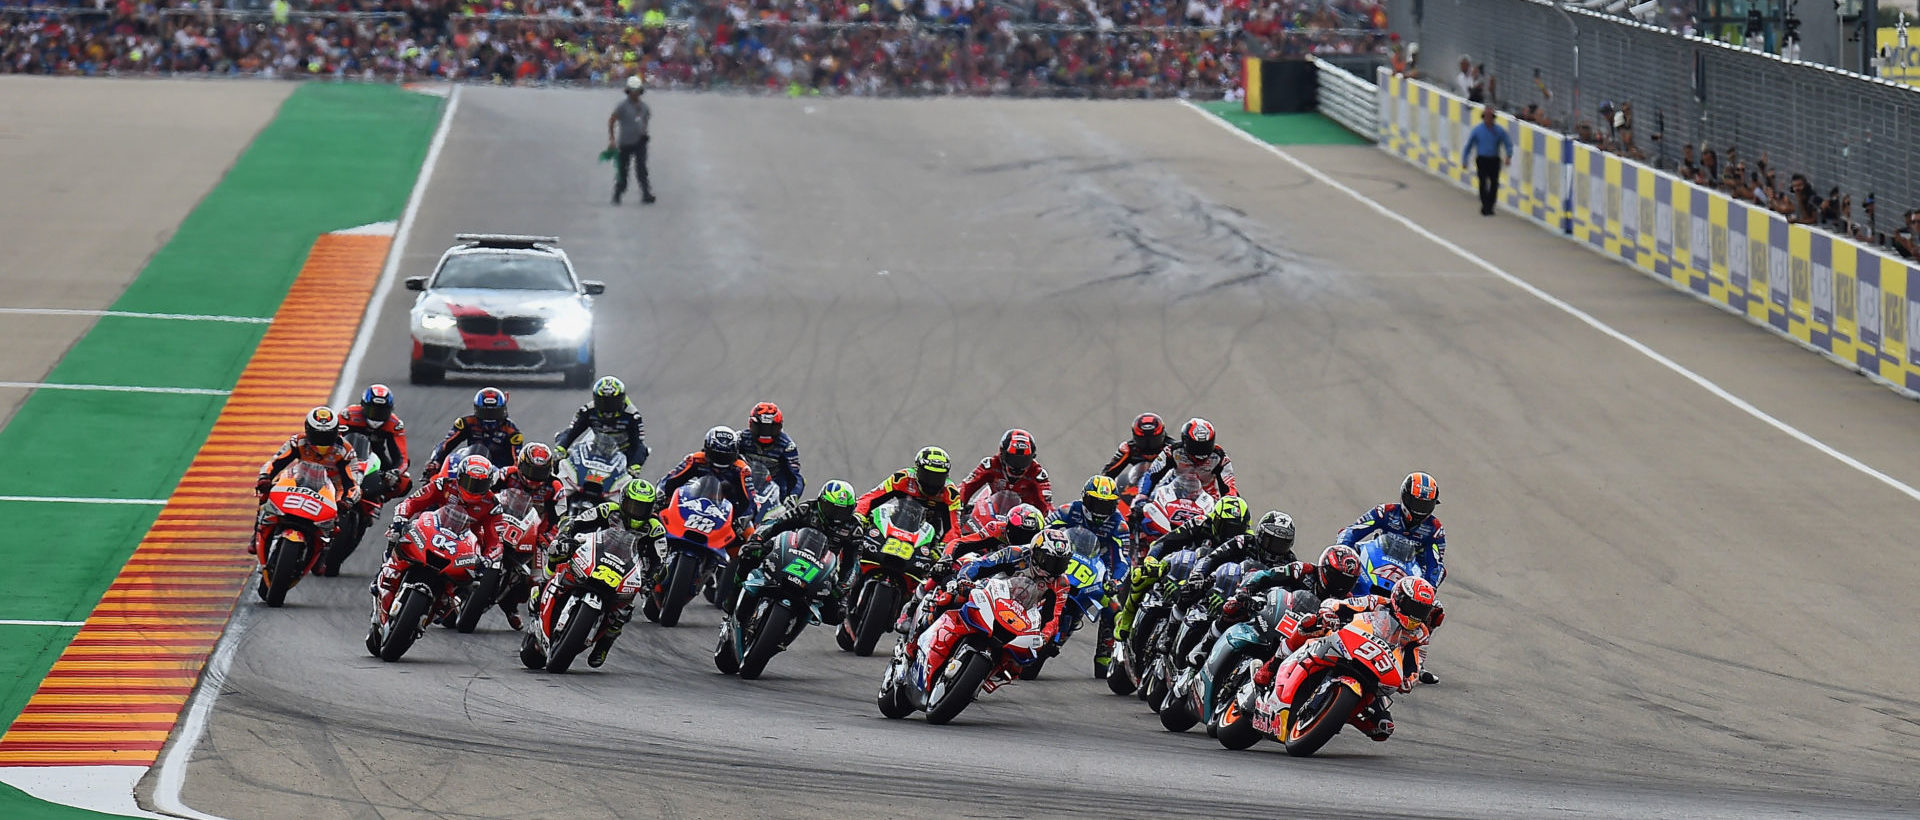 The start of the MotoGP race at Motorland Aragon. Photo courtesy of Michelin,